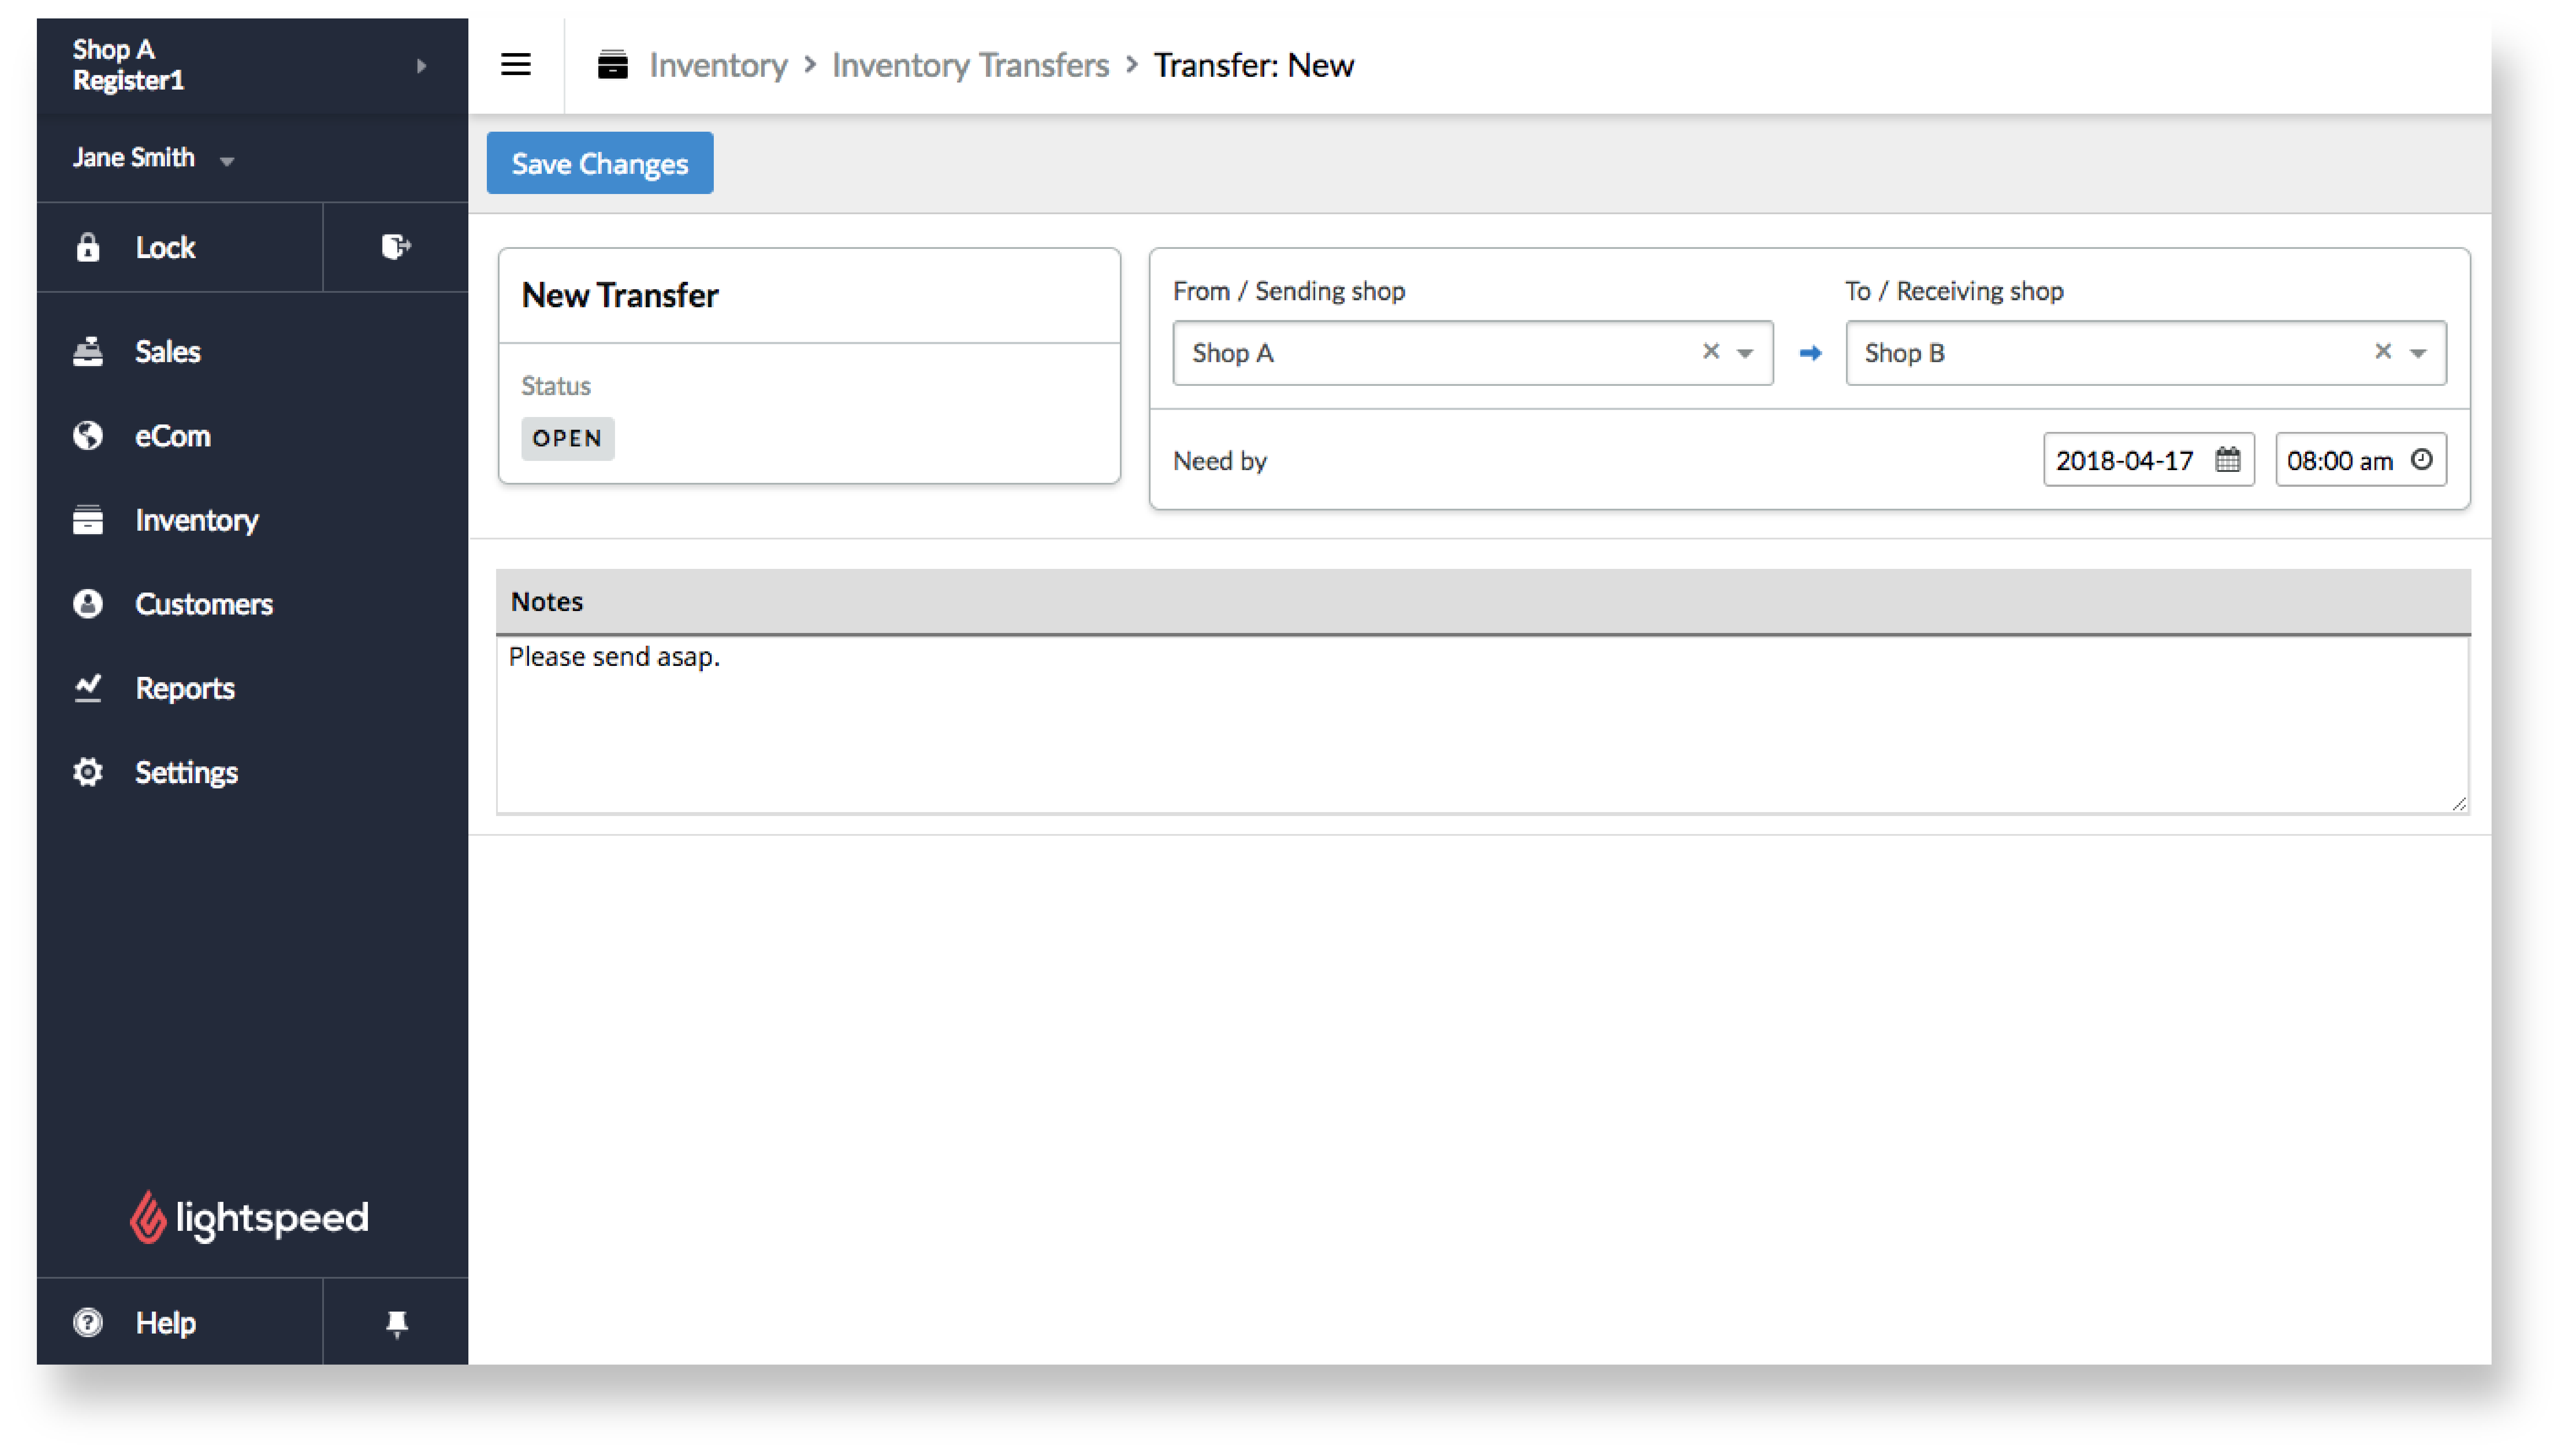 Create a new transfers page with the details of the transfer filled out.